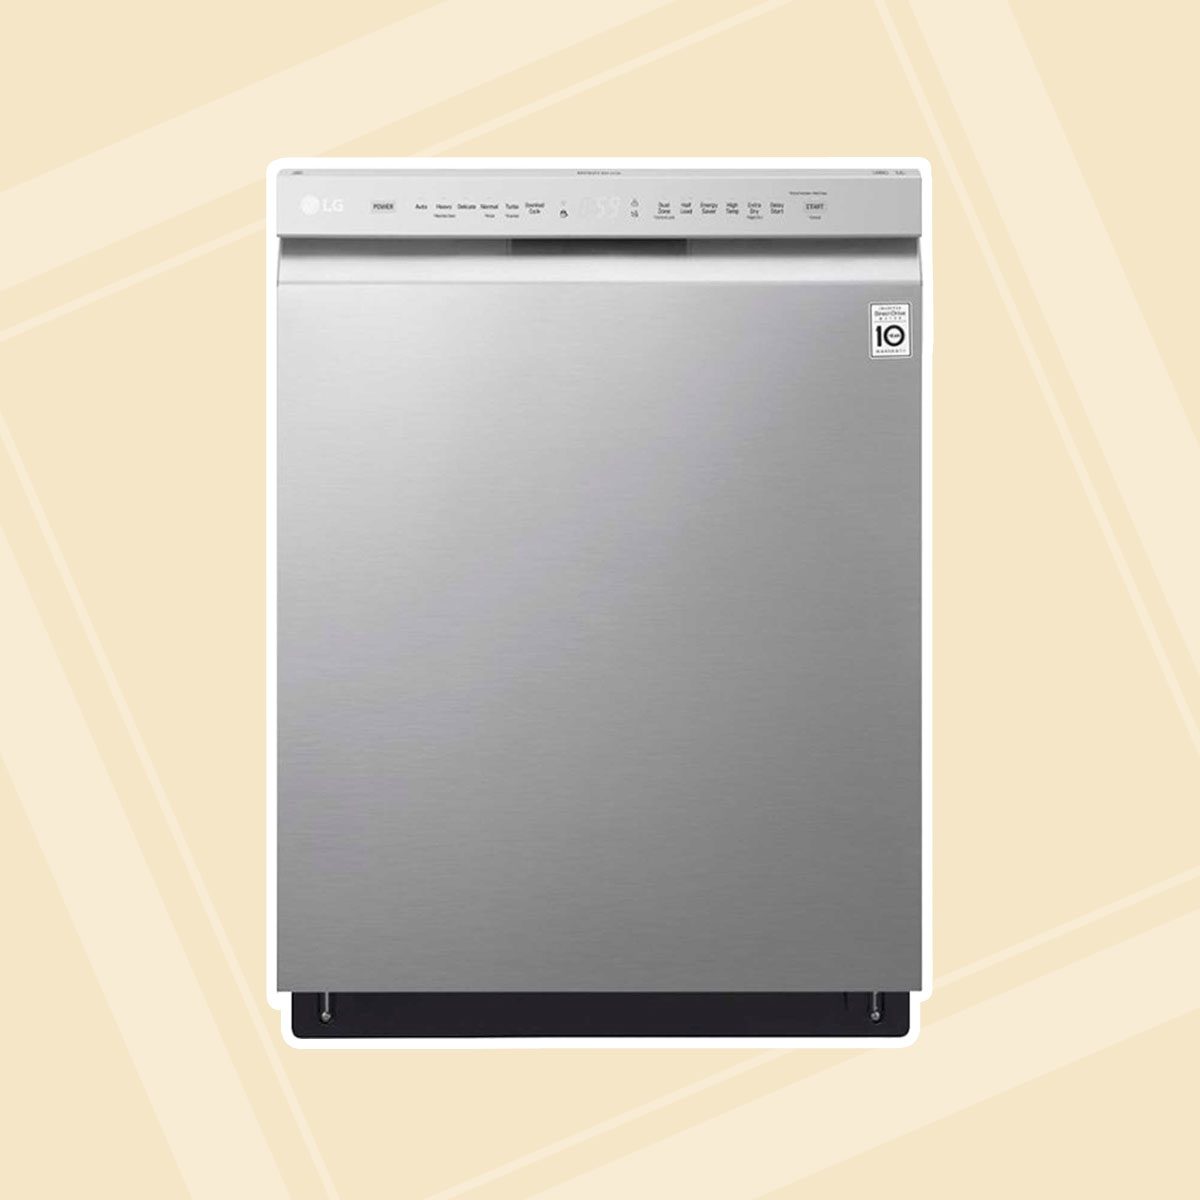 LG 24" Front Control Built-In Dishwasher with QuadWash and Stainless Steel Tub